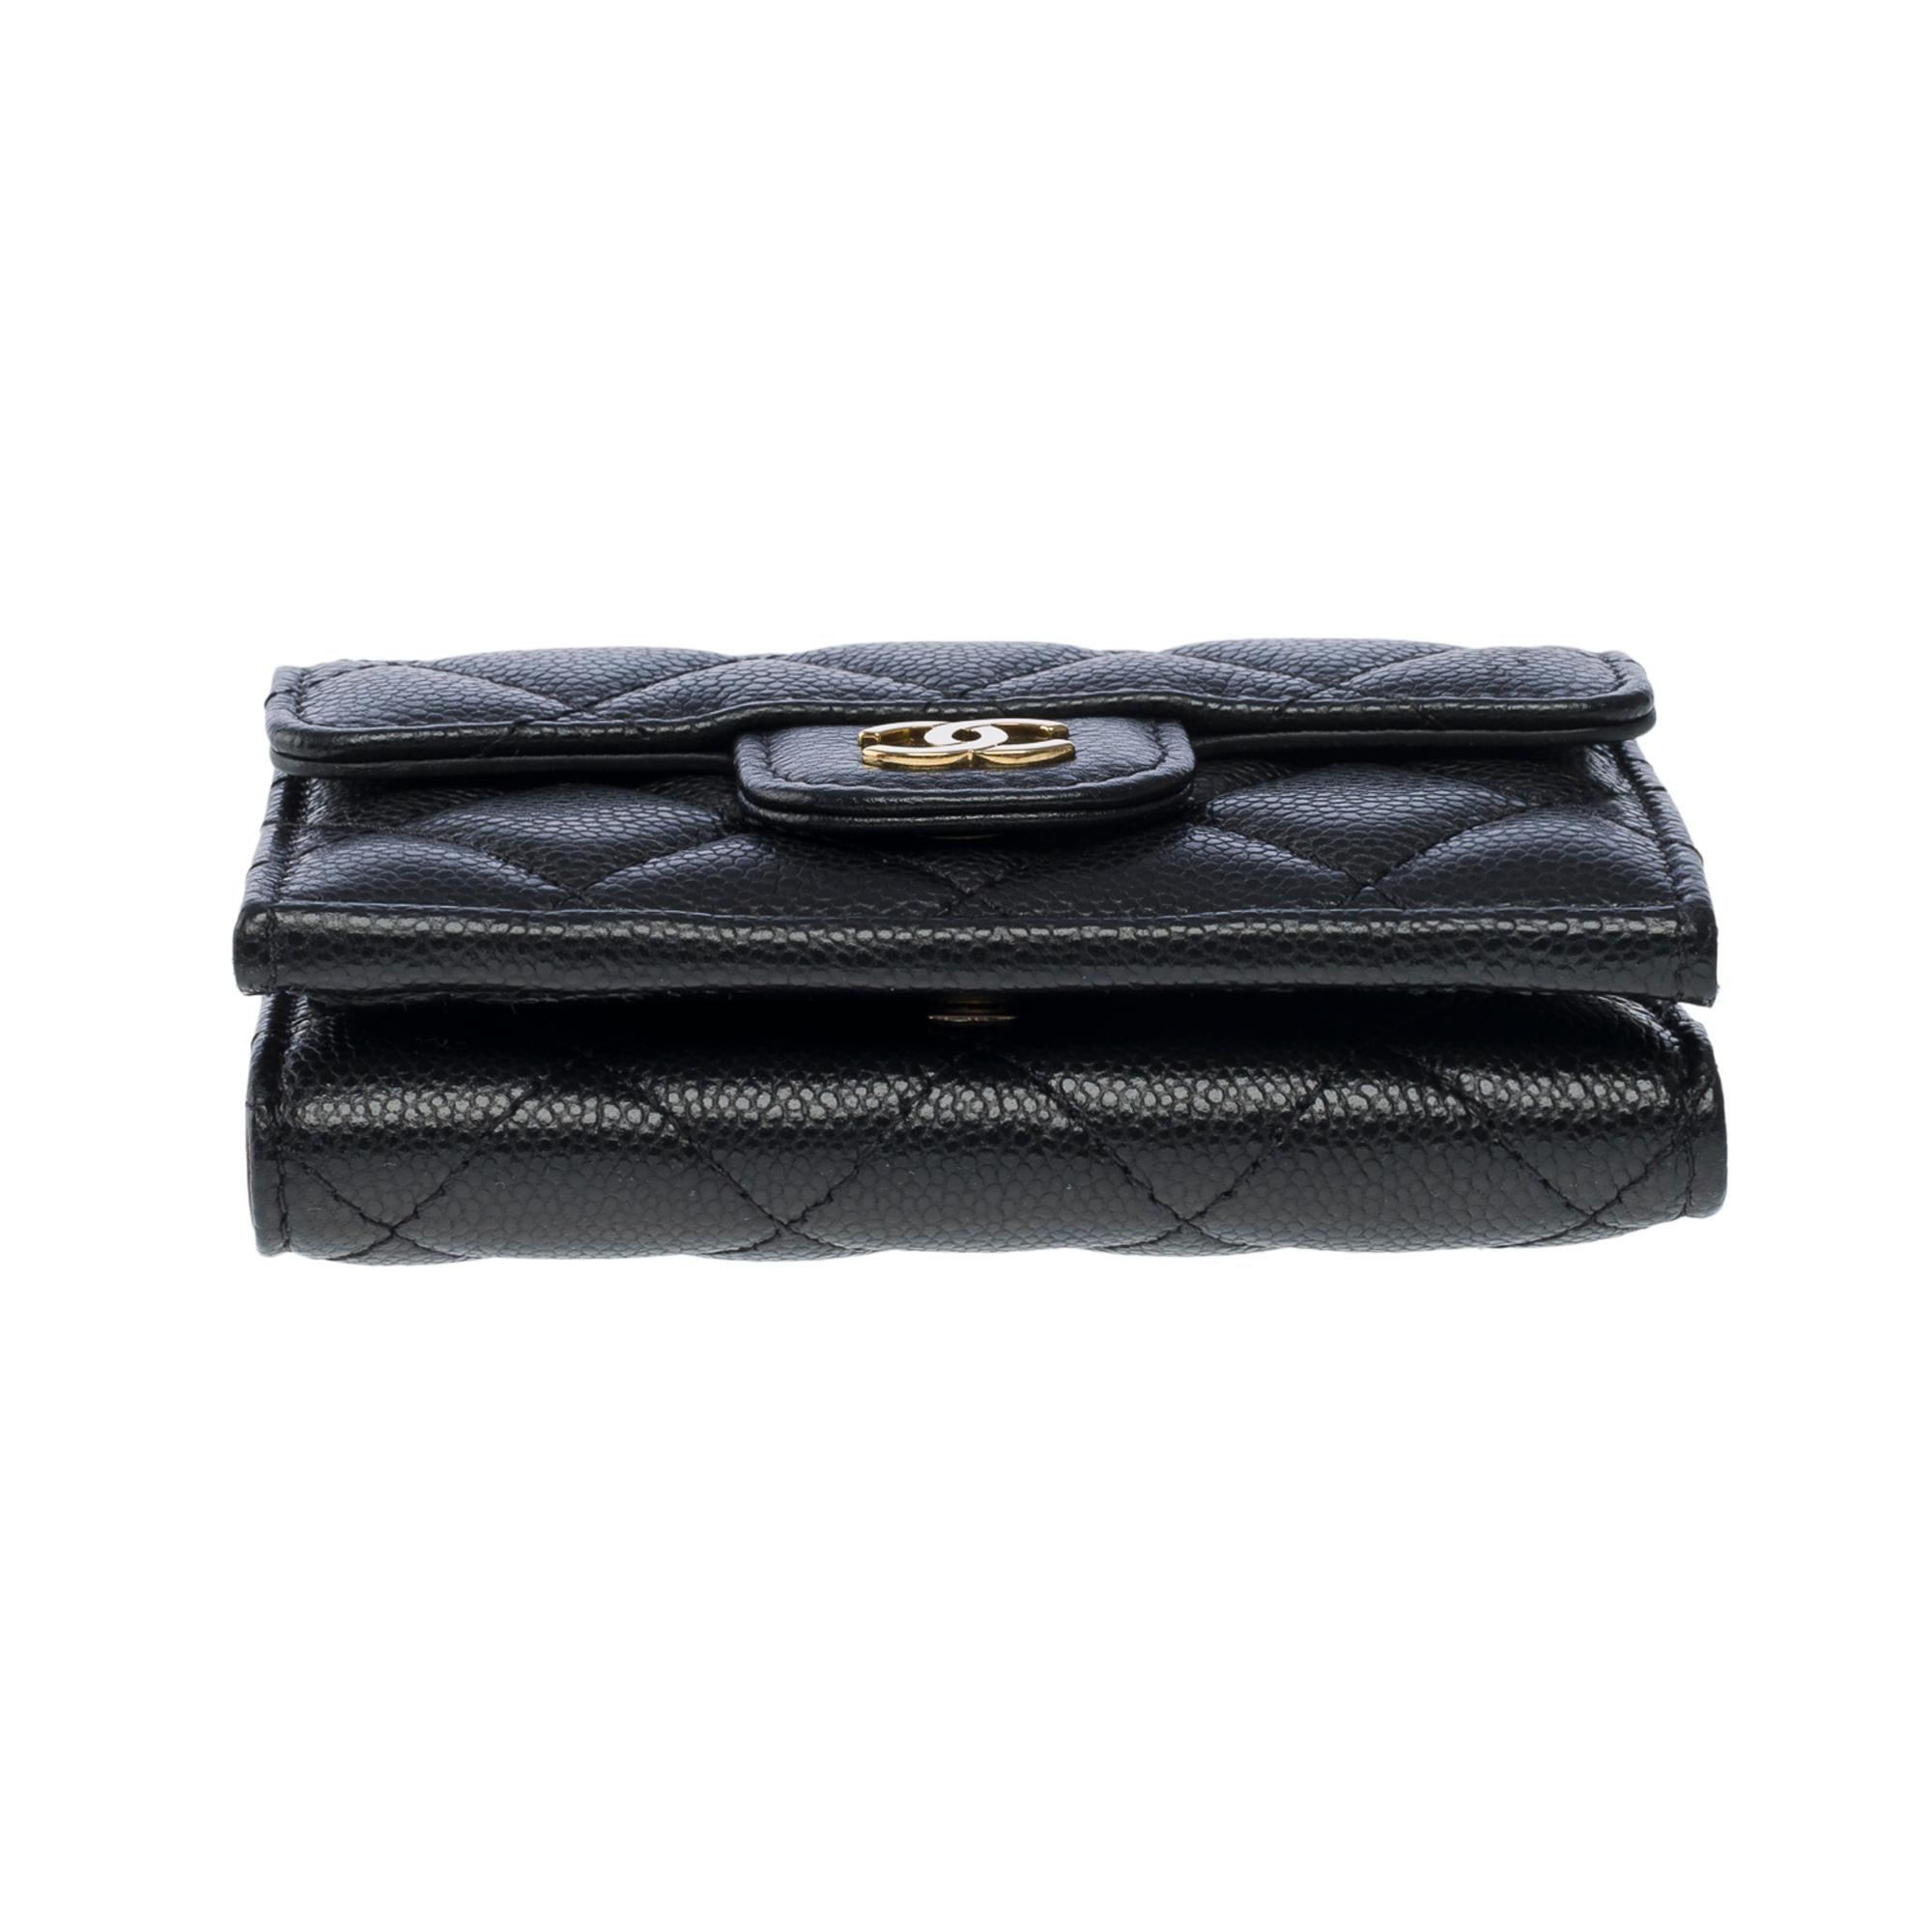 Gorgeous Chanel Wallet  in black Caviar quilted leather, GHW 7